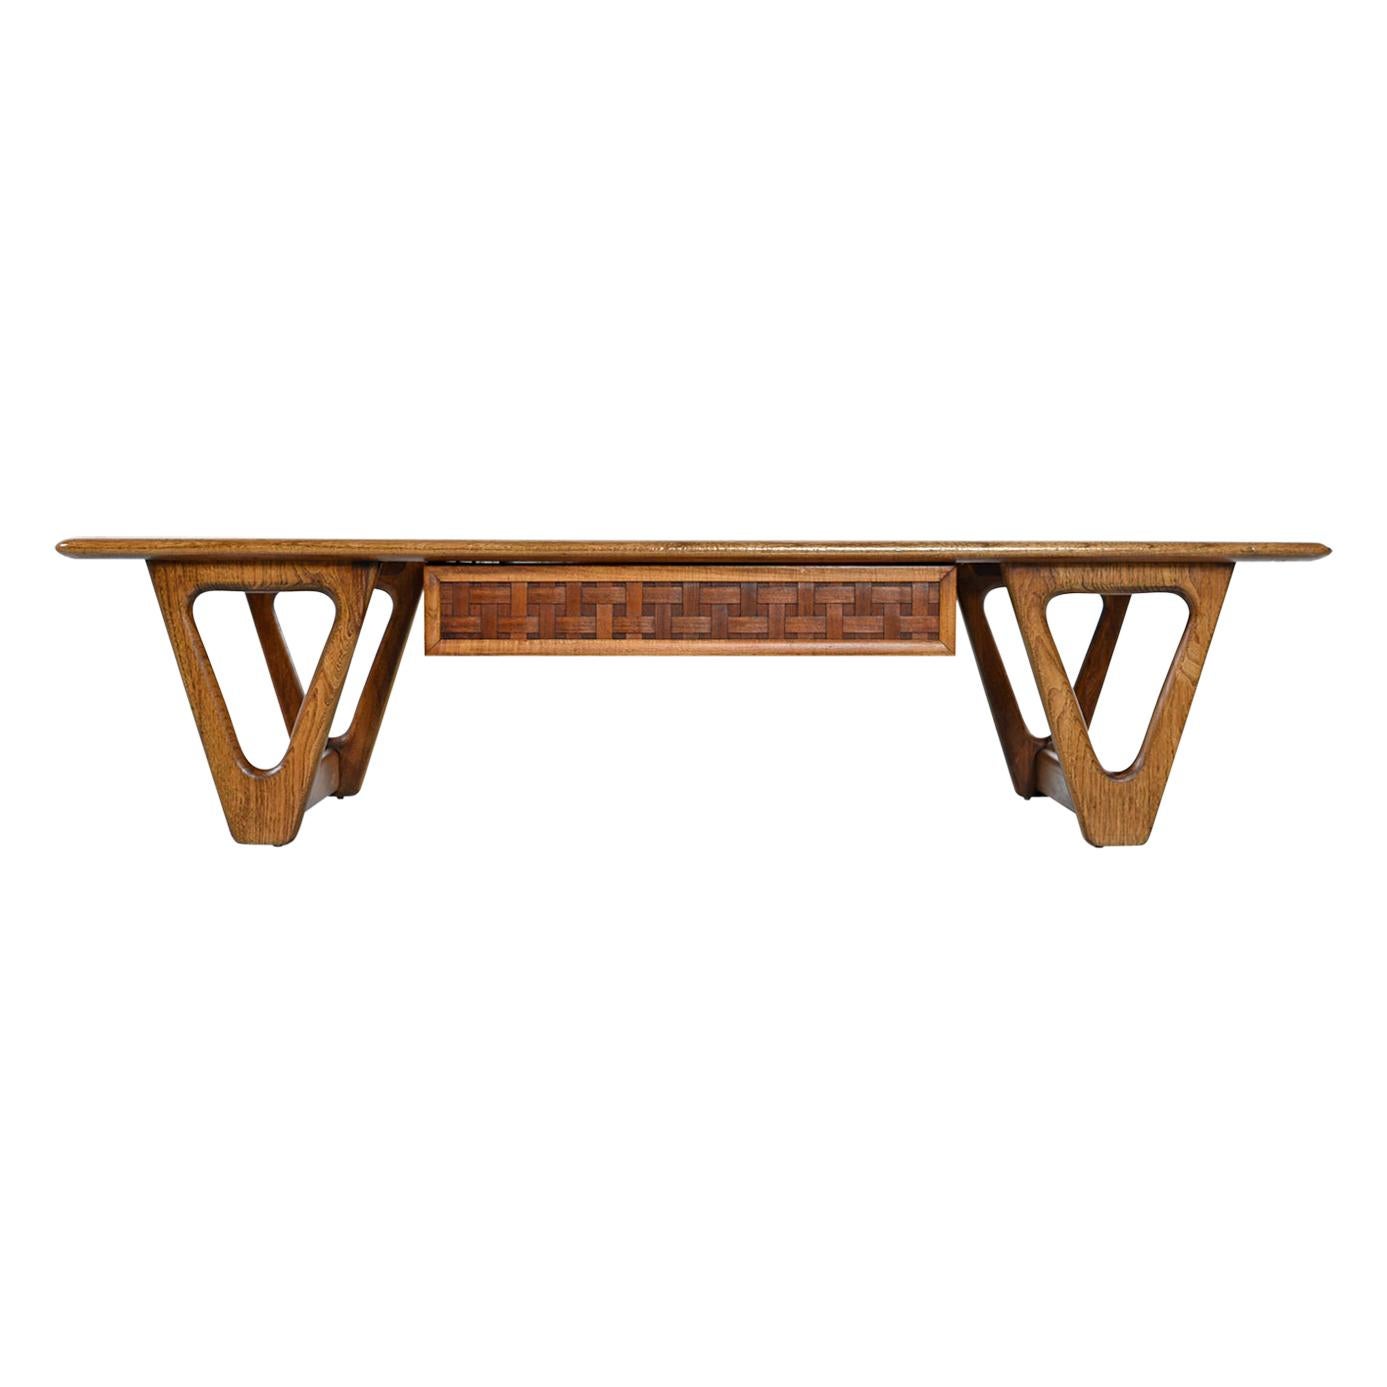 Mid-Century Modern lane coffee table made of solid walnut and oakwood. This piece is from their much beloved Perception line designed by Warren Church. Stunning example of American Danish / Scandinavian style furniture design from the 1960s. The